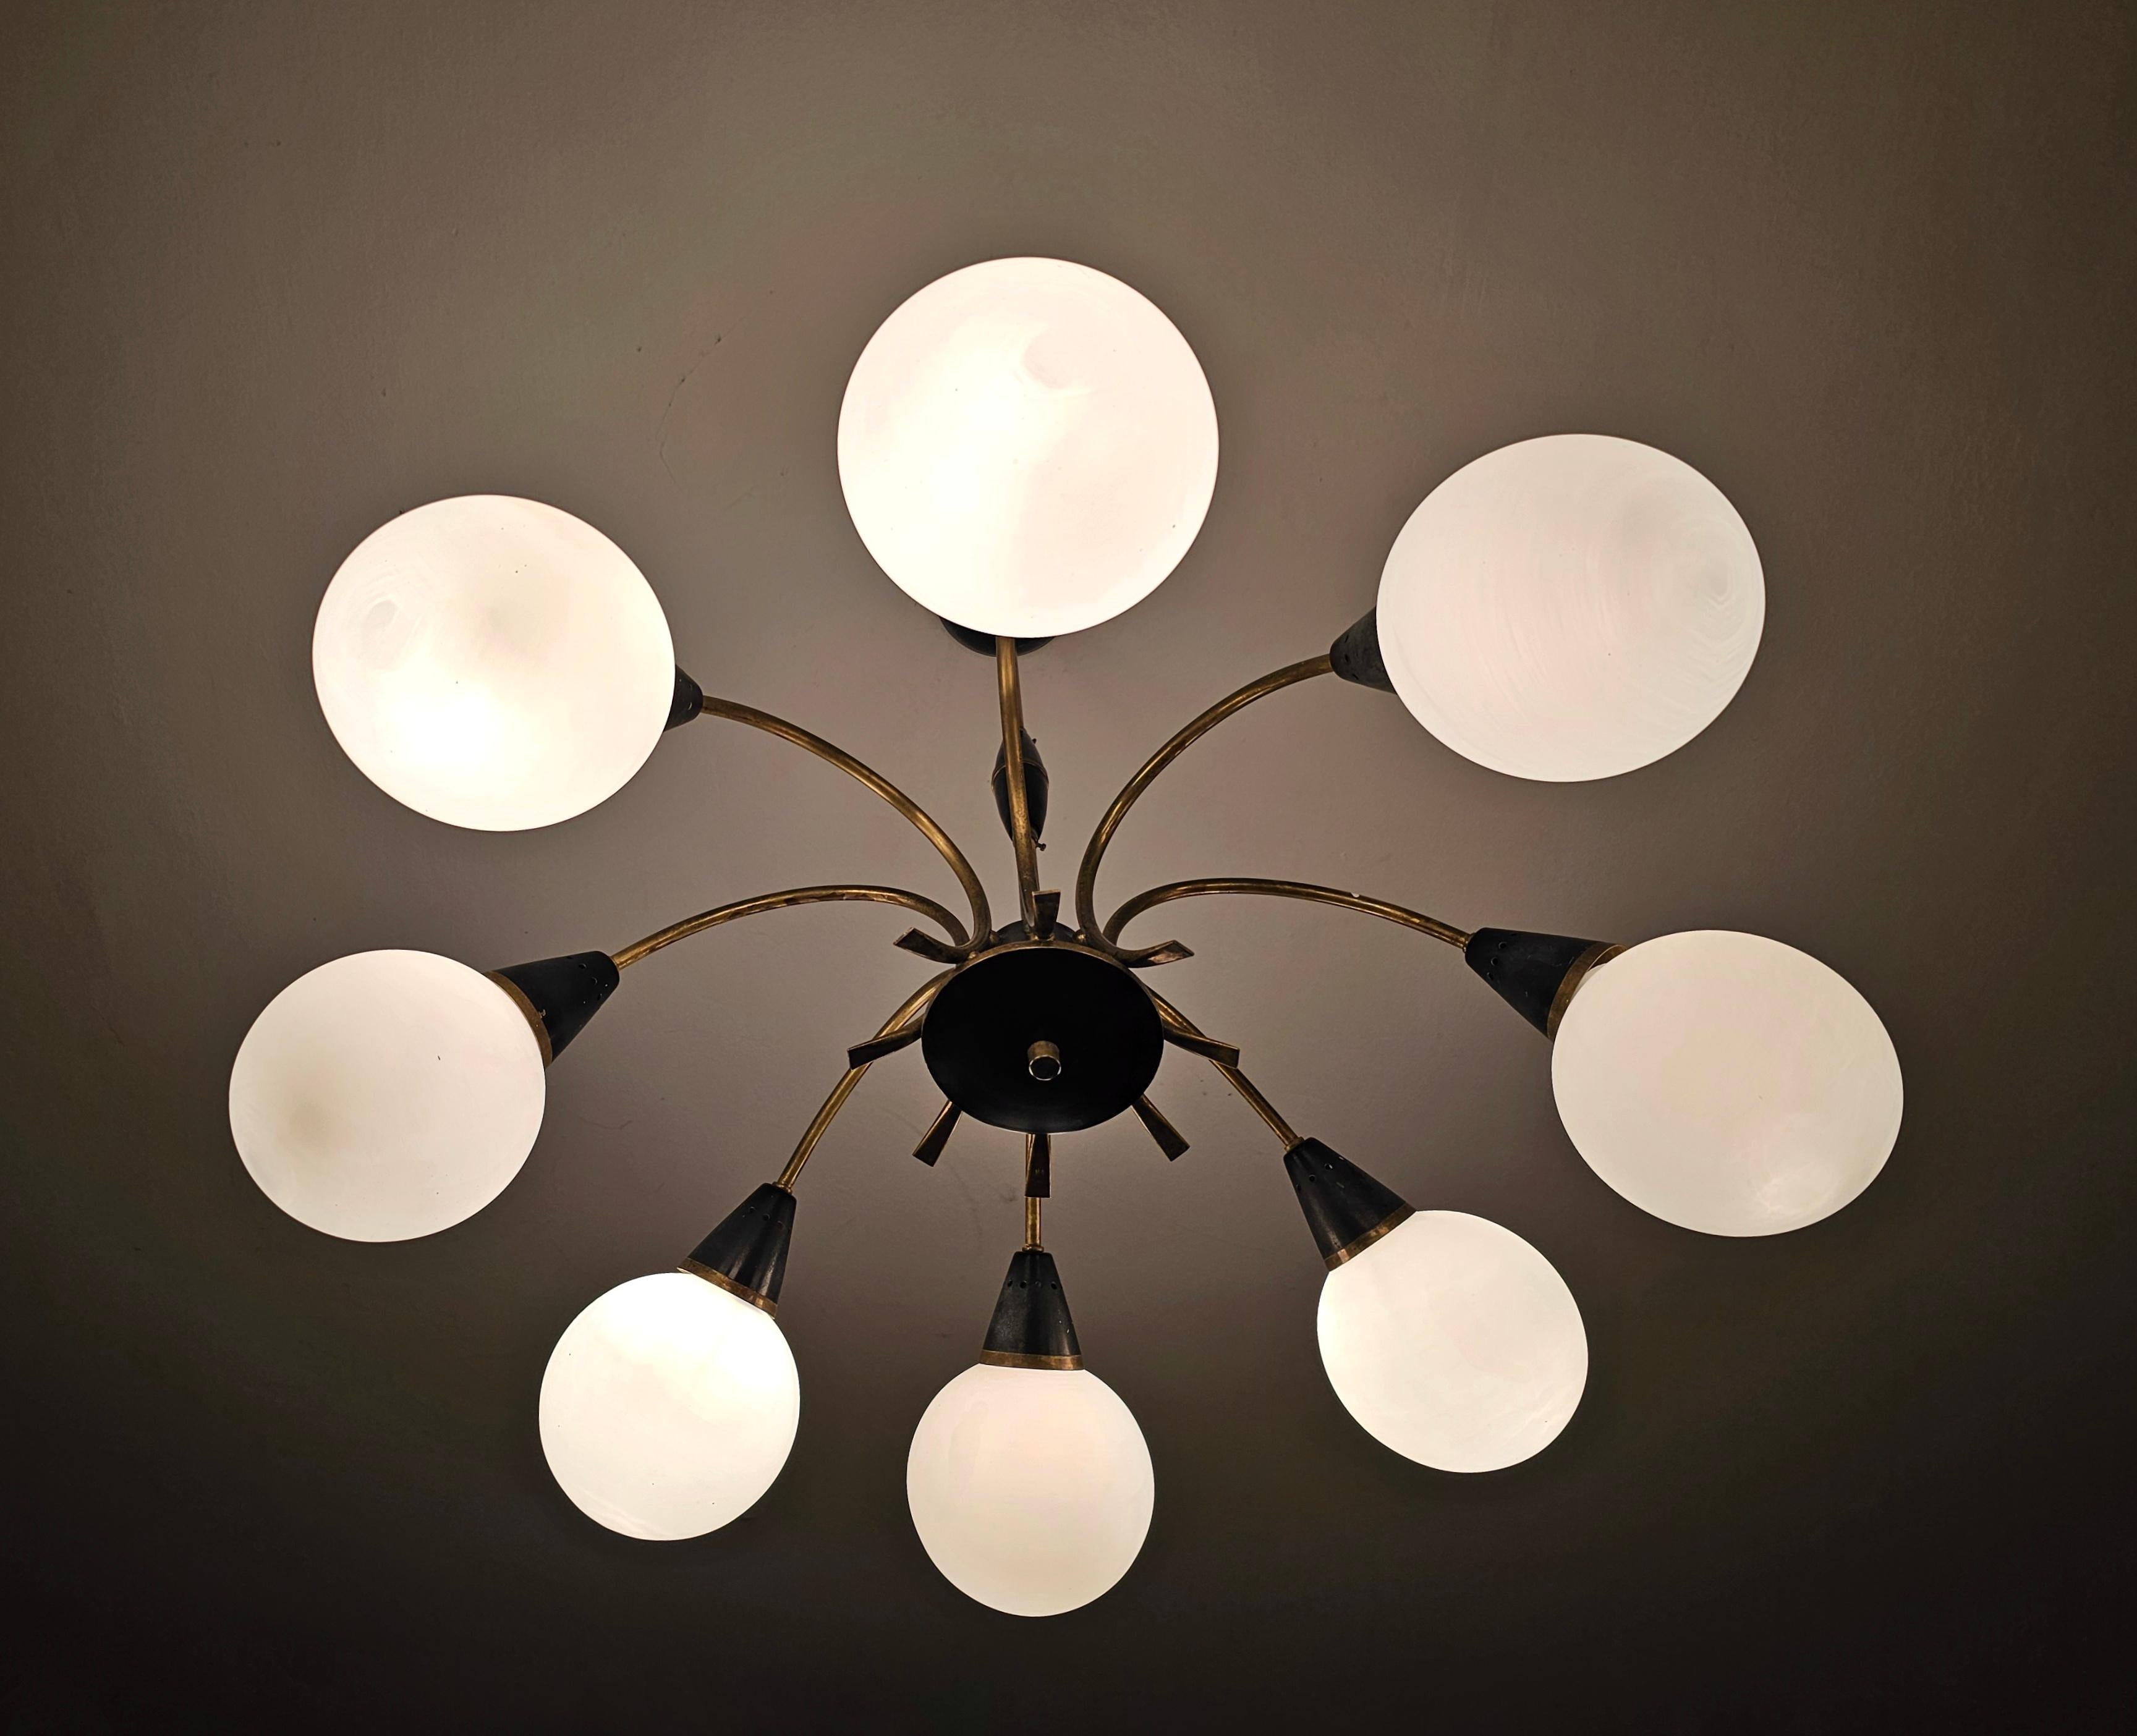 In this listing you will find a stunning 8-Arm Mid Century Modern Chandelier attr. to Stilnovo. It is done in brass and black painted brass, with 8 lights within opaline glass balls and spider-like shape. Made in Italy in 1950s.

Good vintage